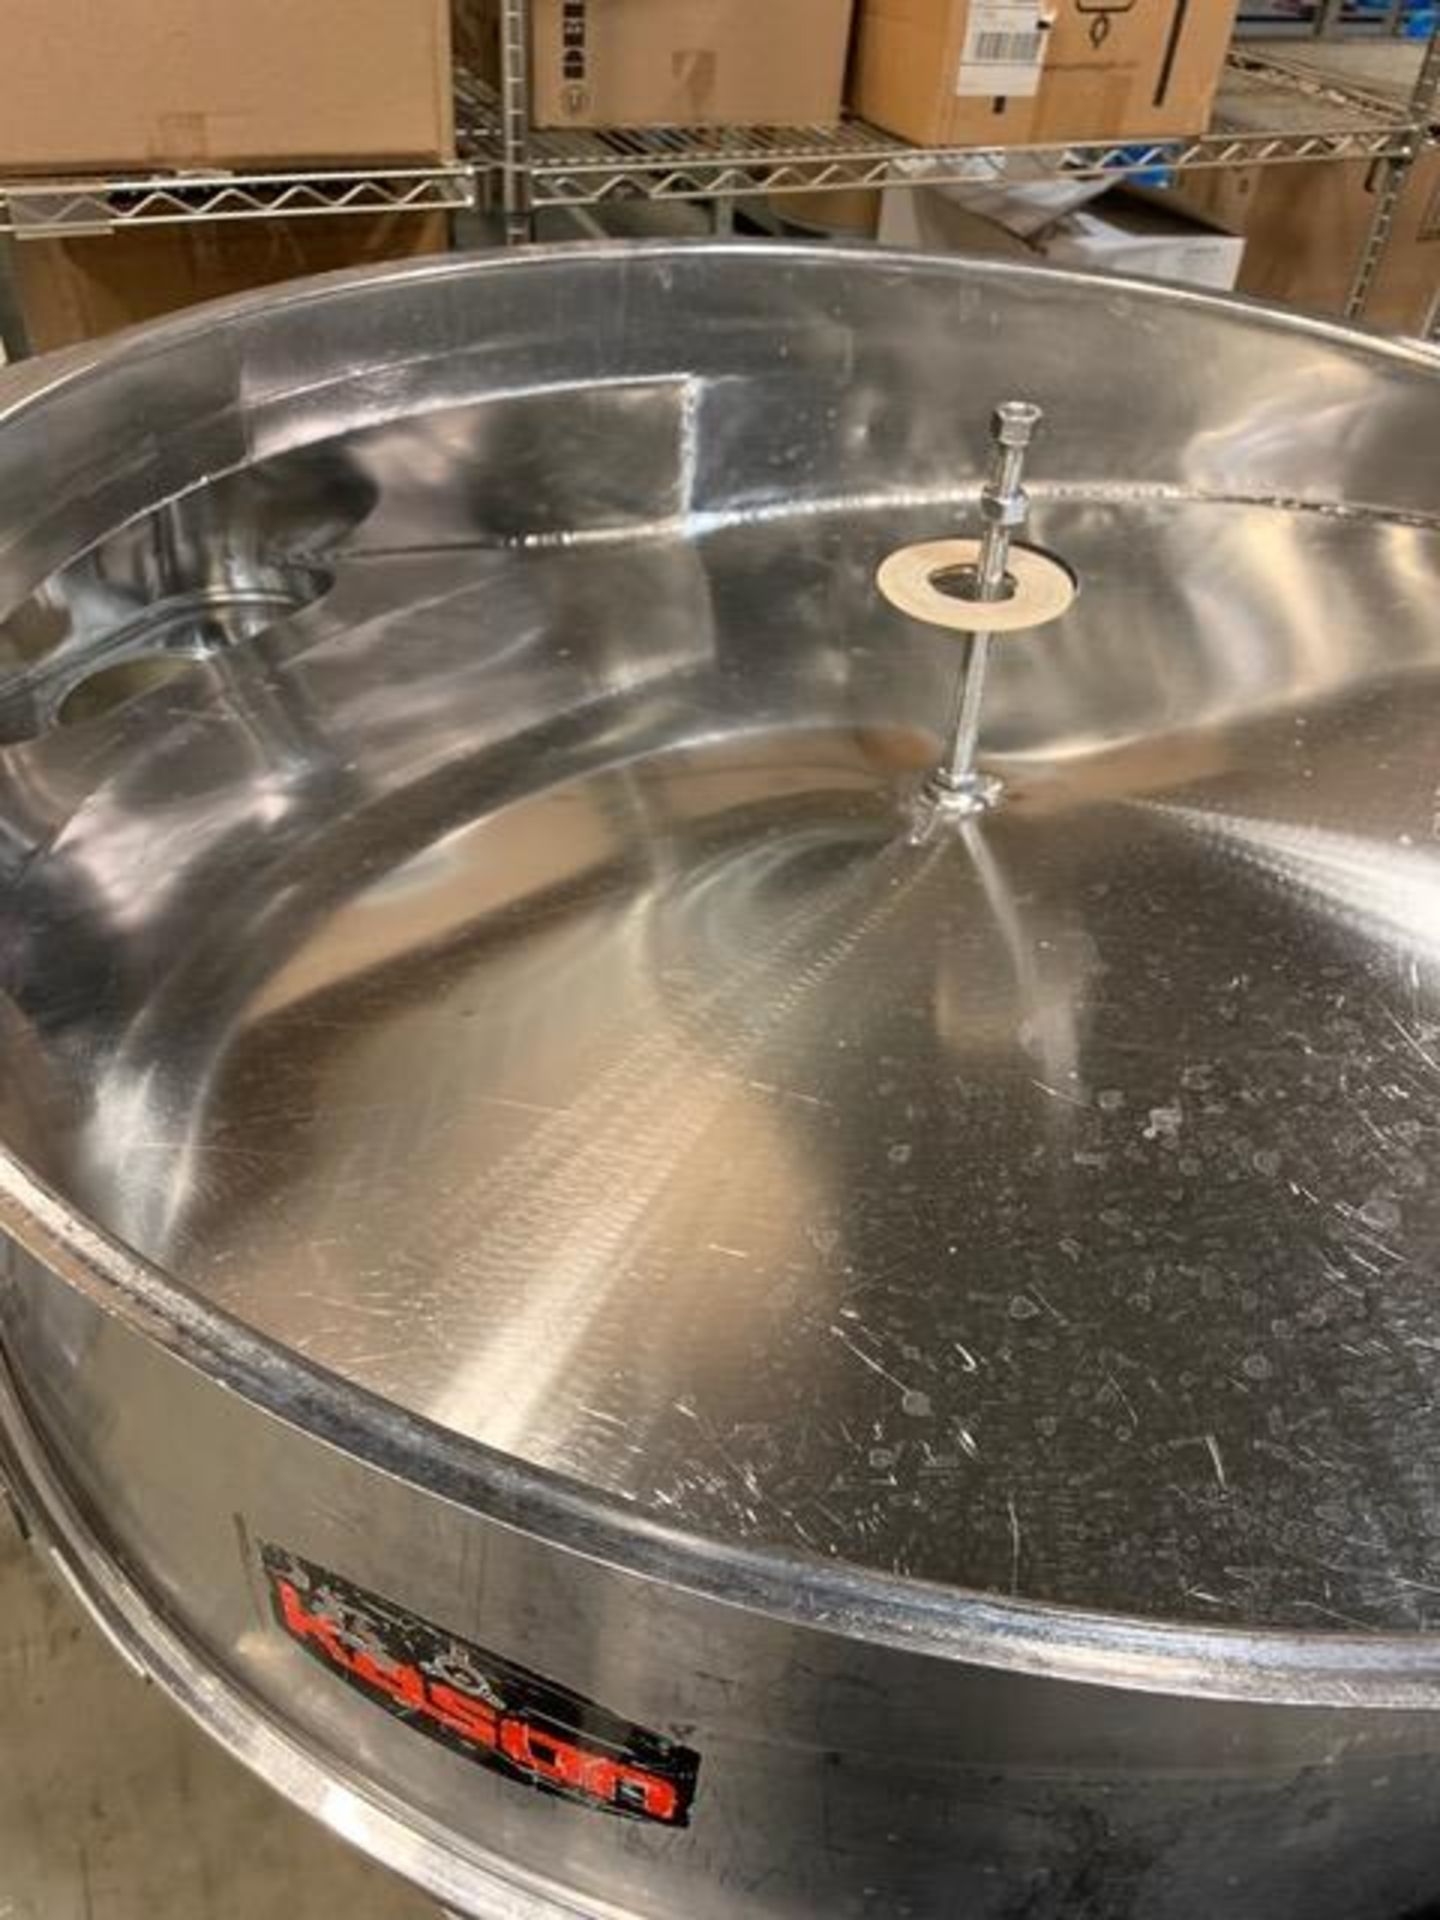 Kason Stainless Steel Vibratory Sifter - Loc: NJ | Rig Fee: $125 - Image 2 of 3